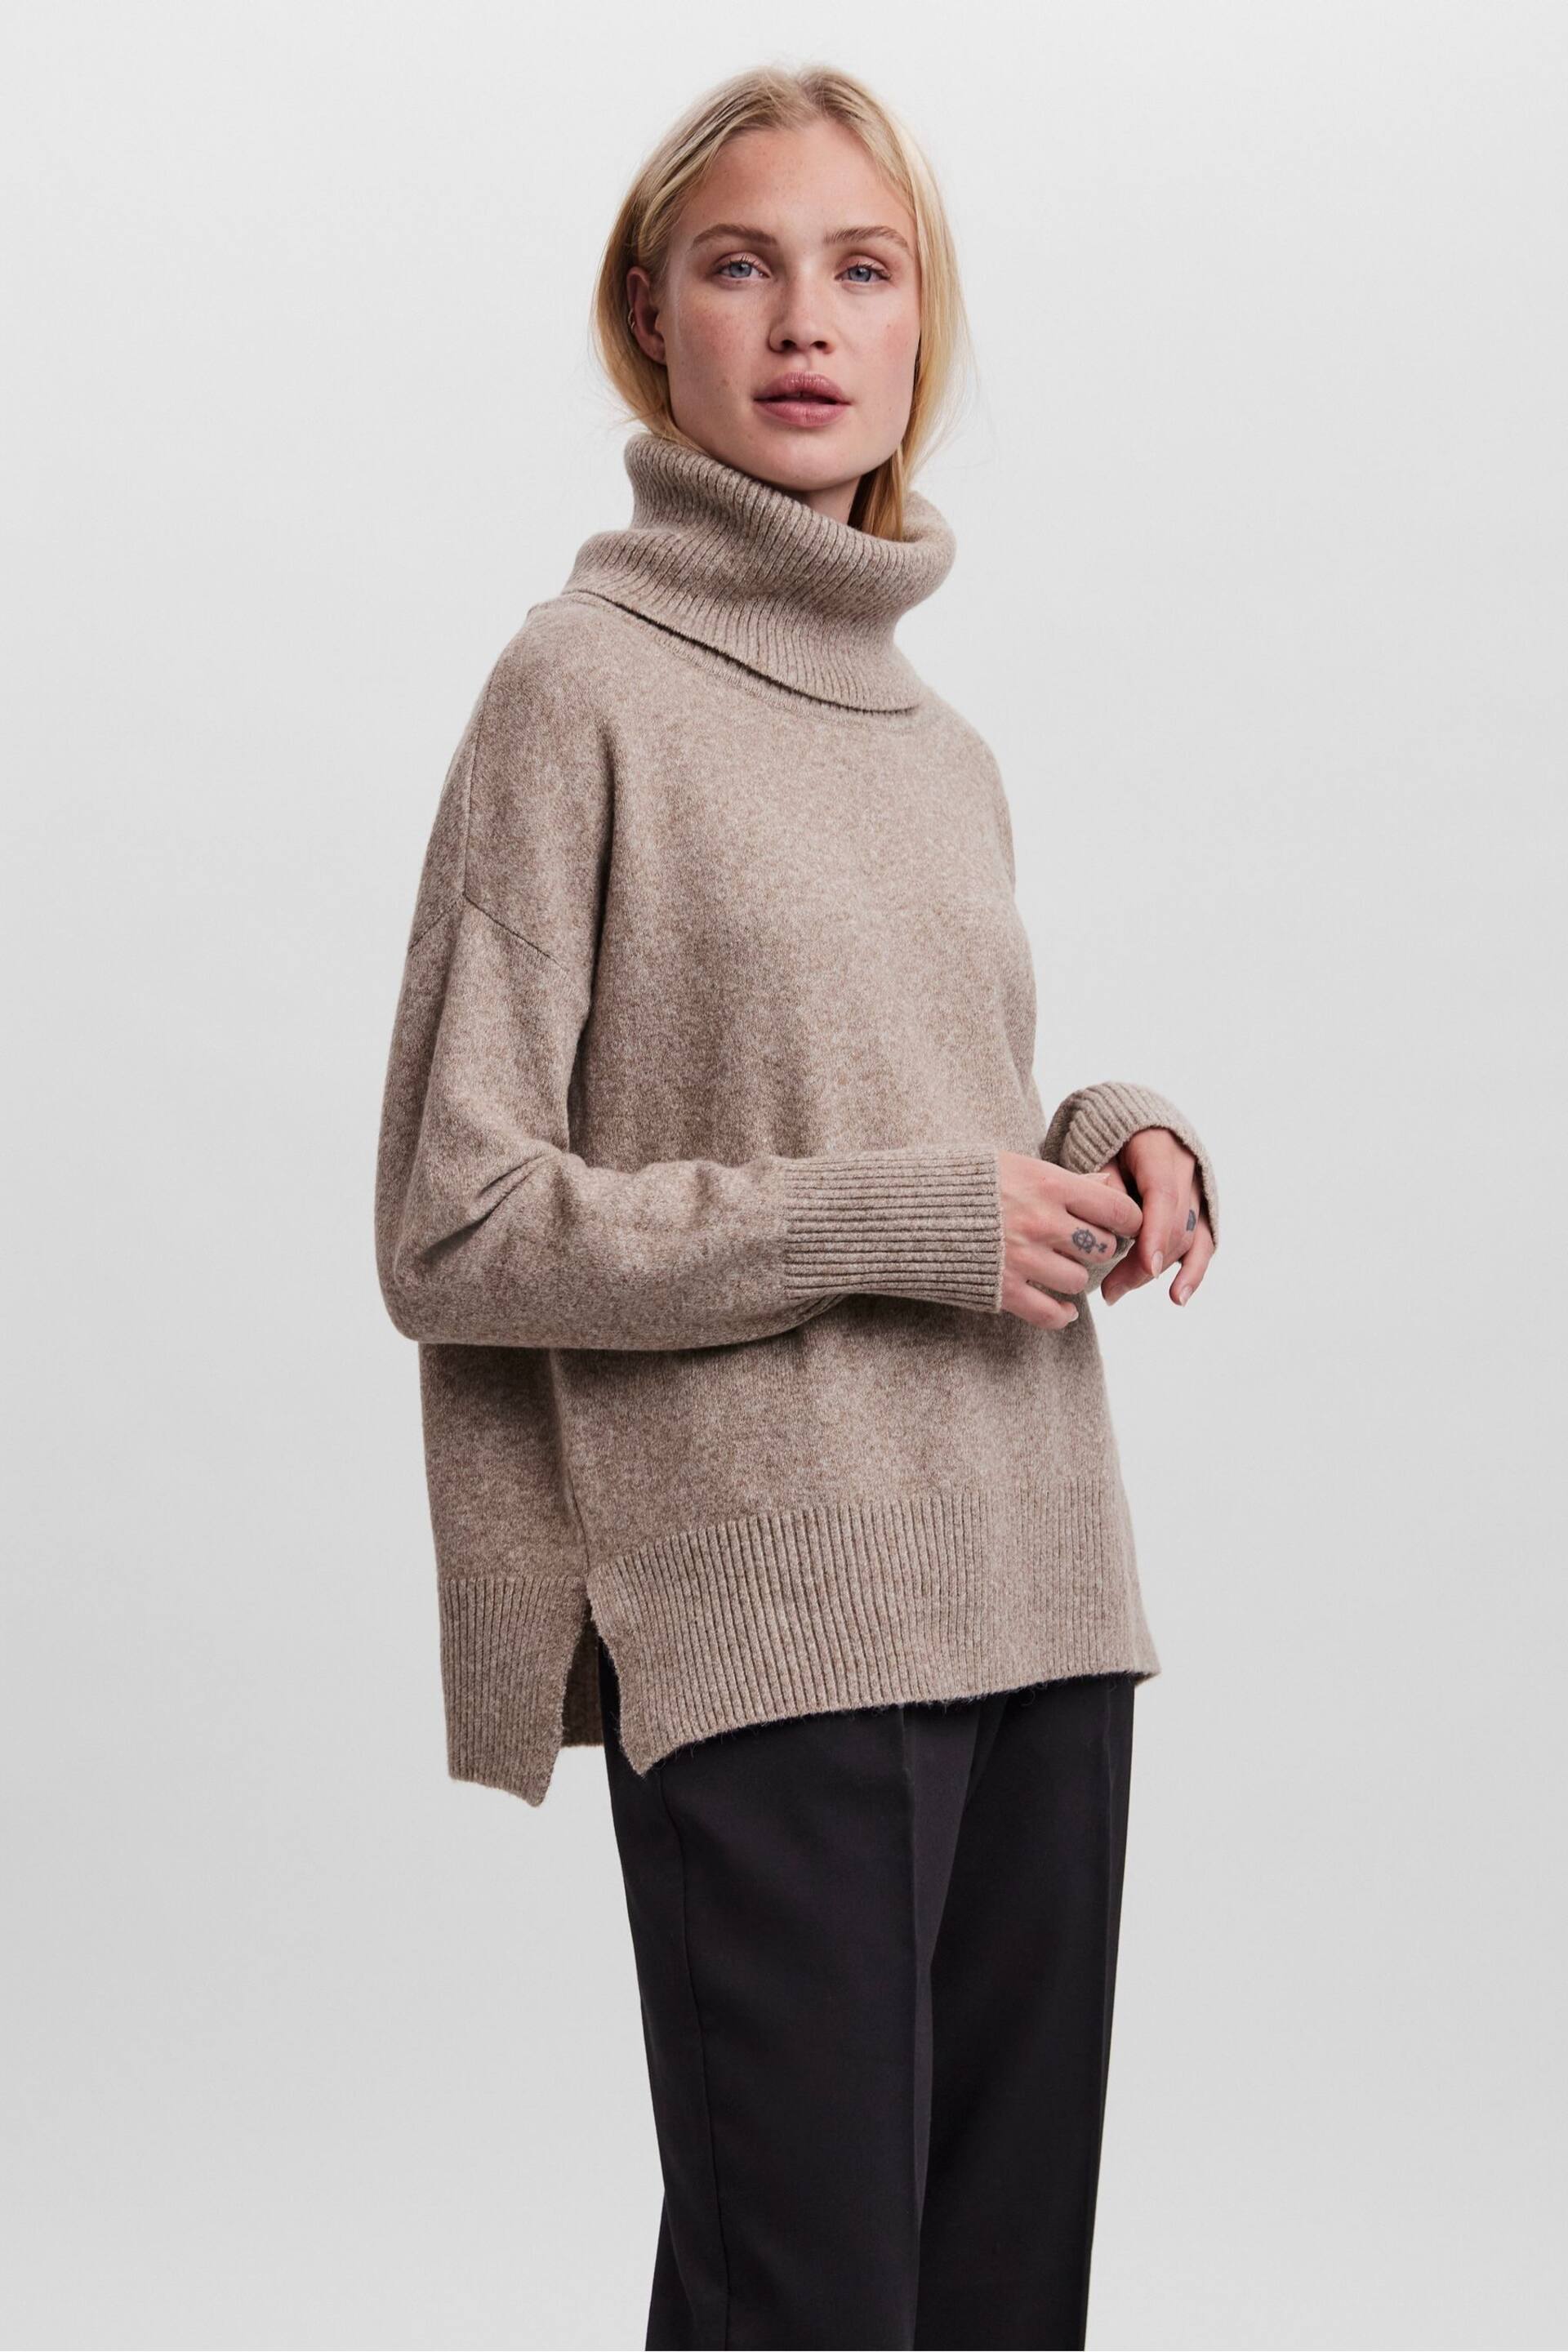 VERO MODA Natural Long Sleeve Cowl Neck Knitted Jumper - Image 1 of 5